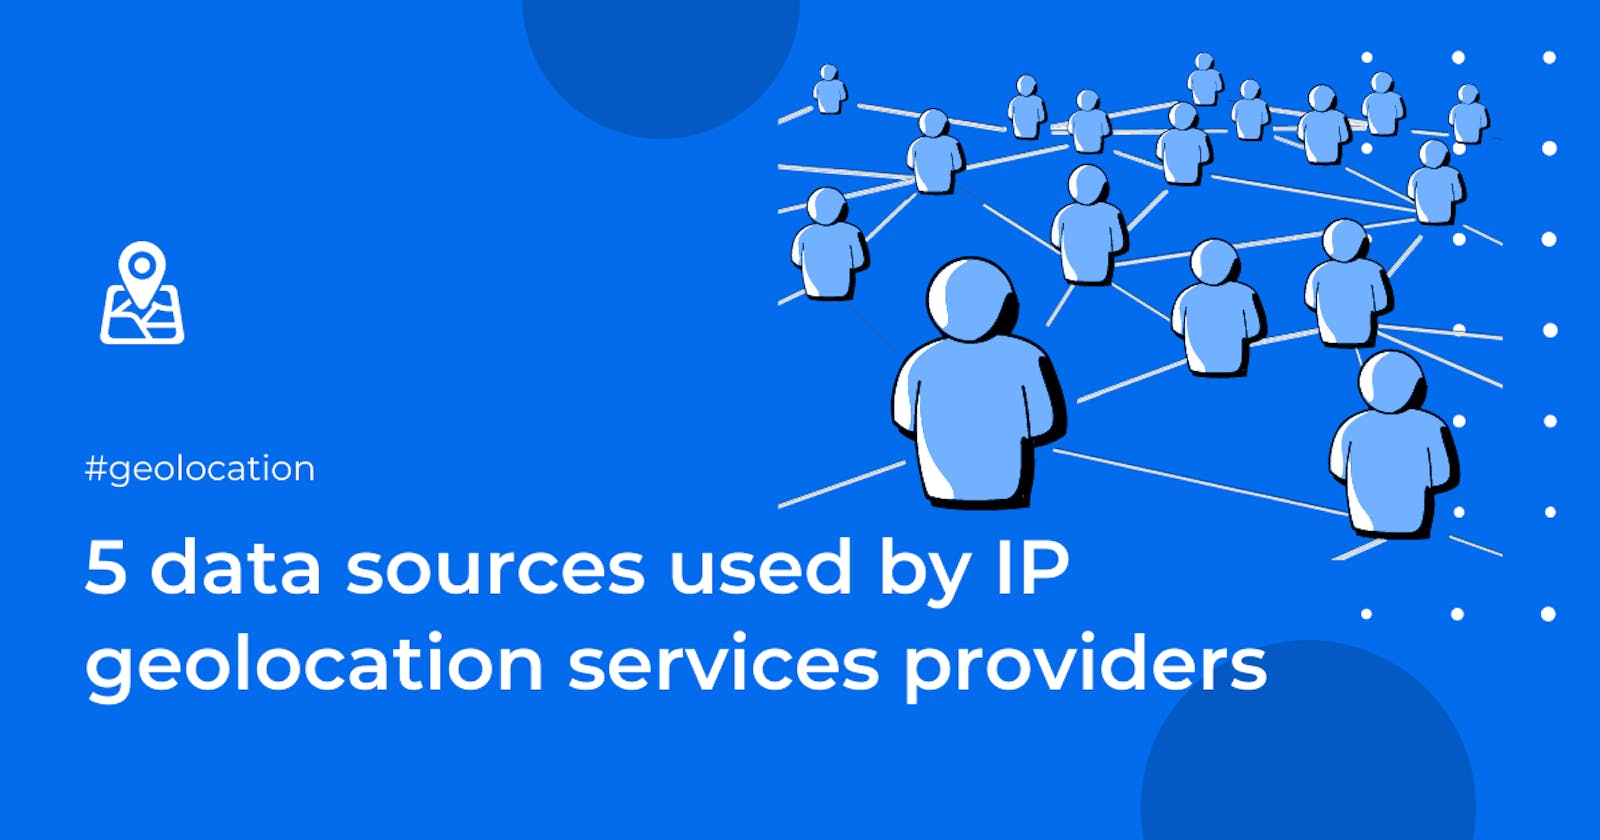 5 data sources used by IP geolocation services providers